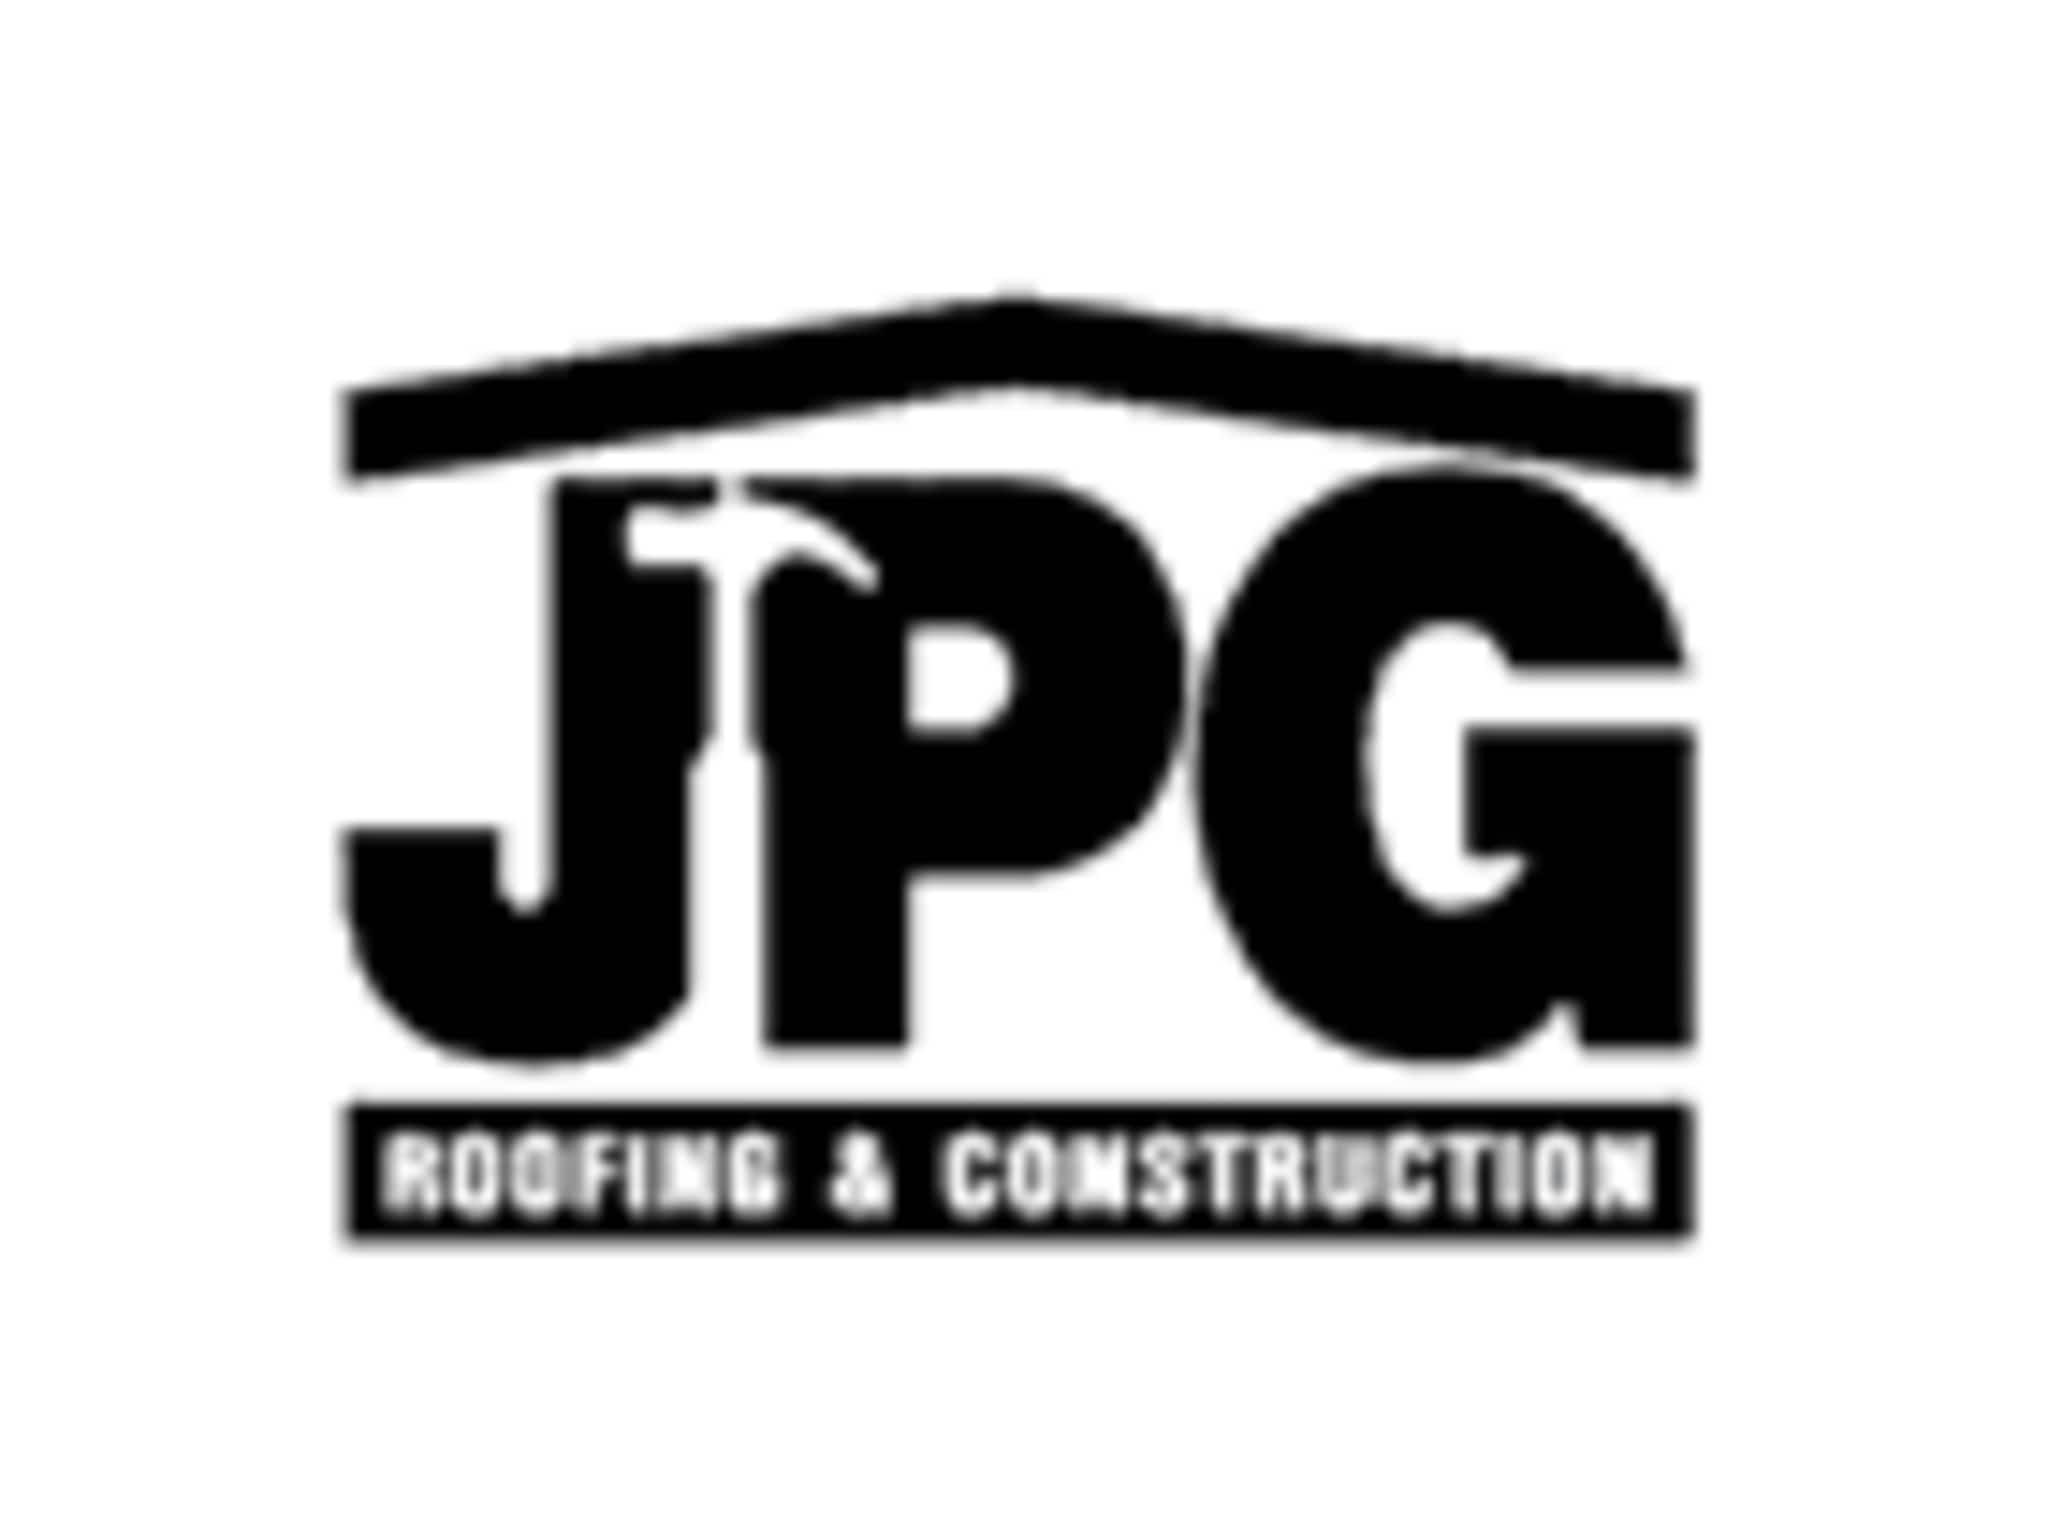 photo JPG Roofing & Construction